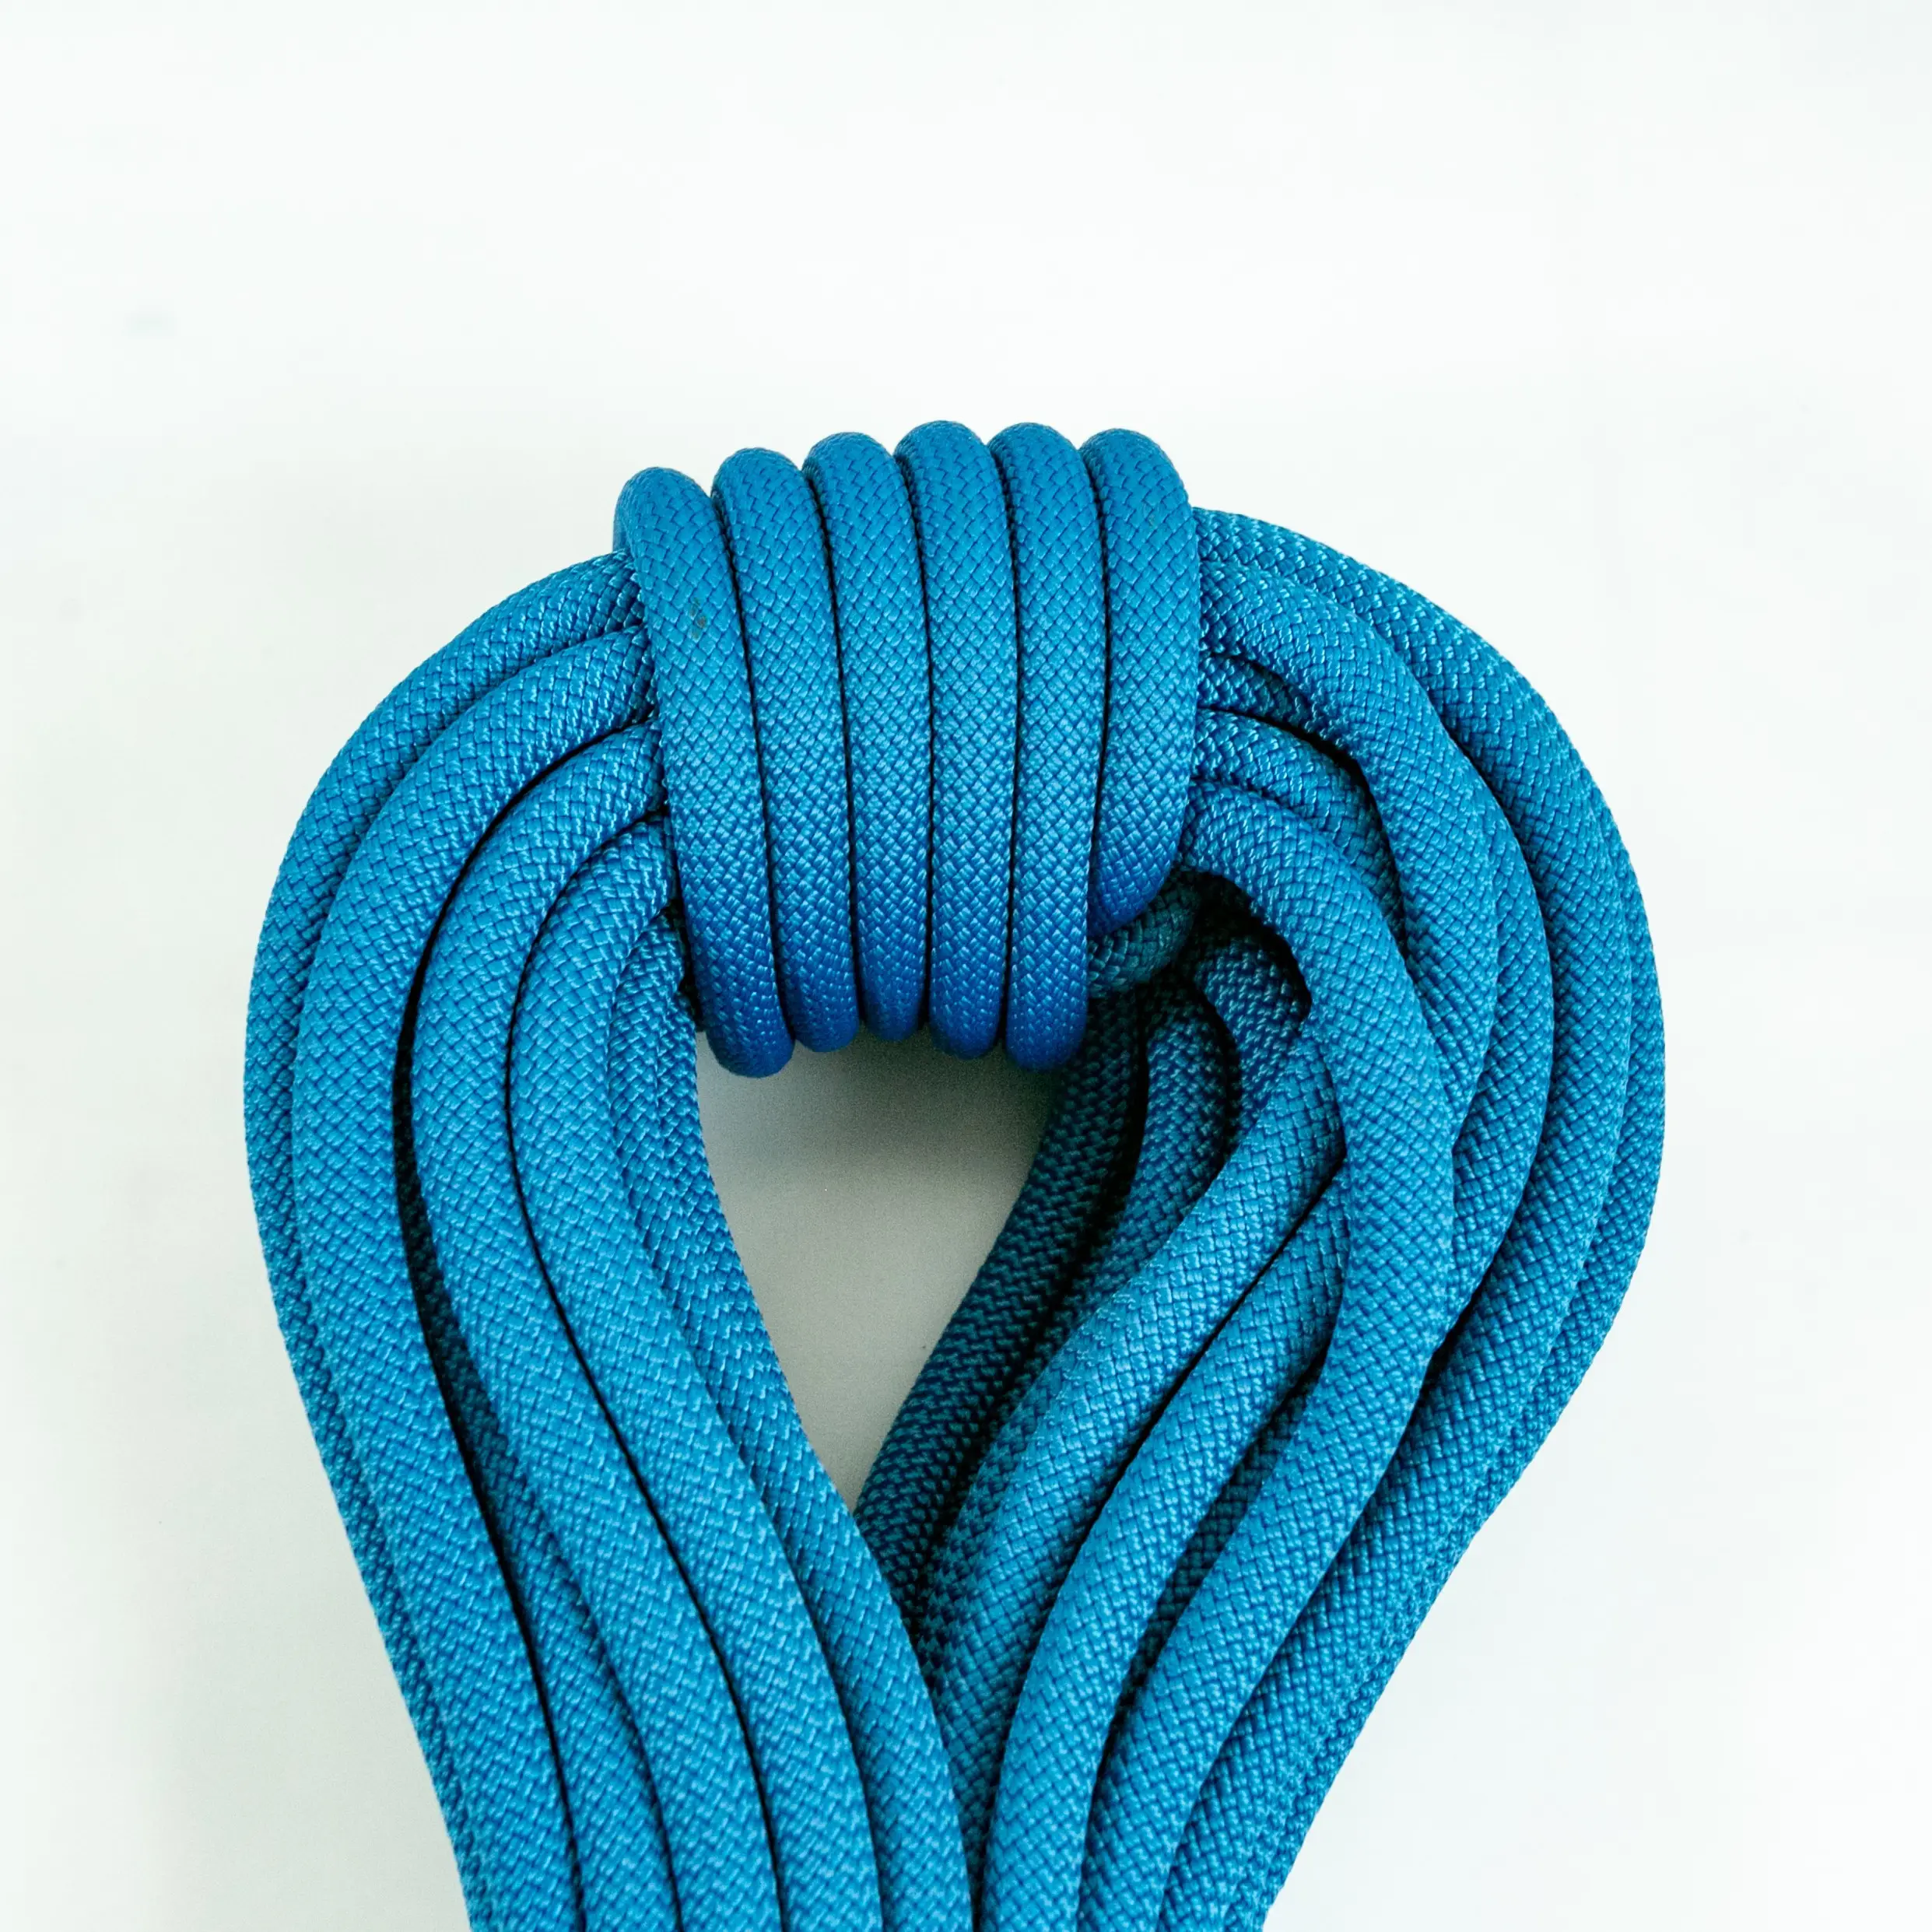 CE EN1891 Certified Static Rope 11mm For Work At Height And Rope Access